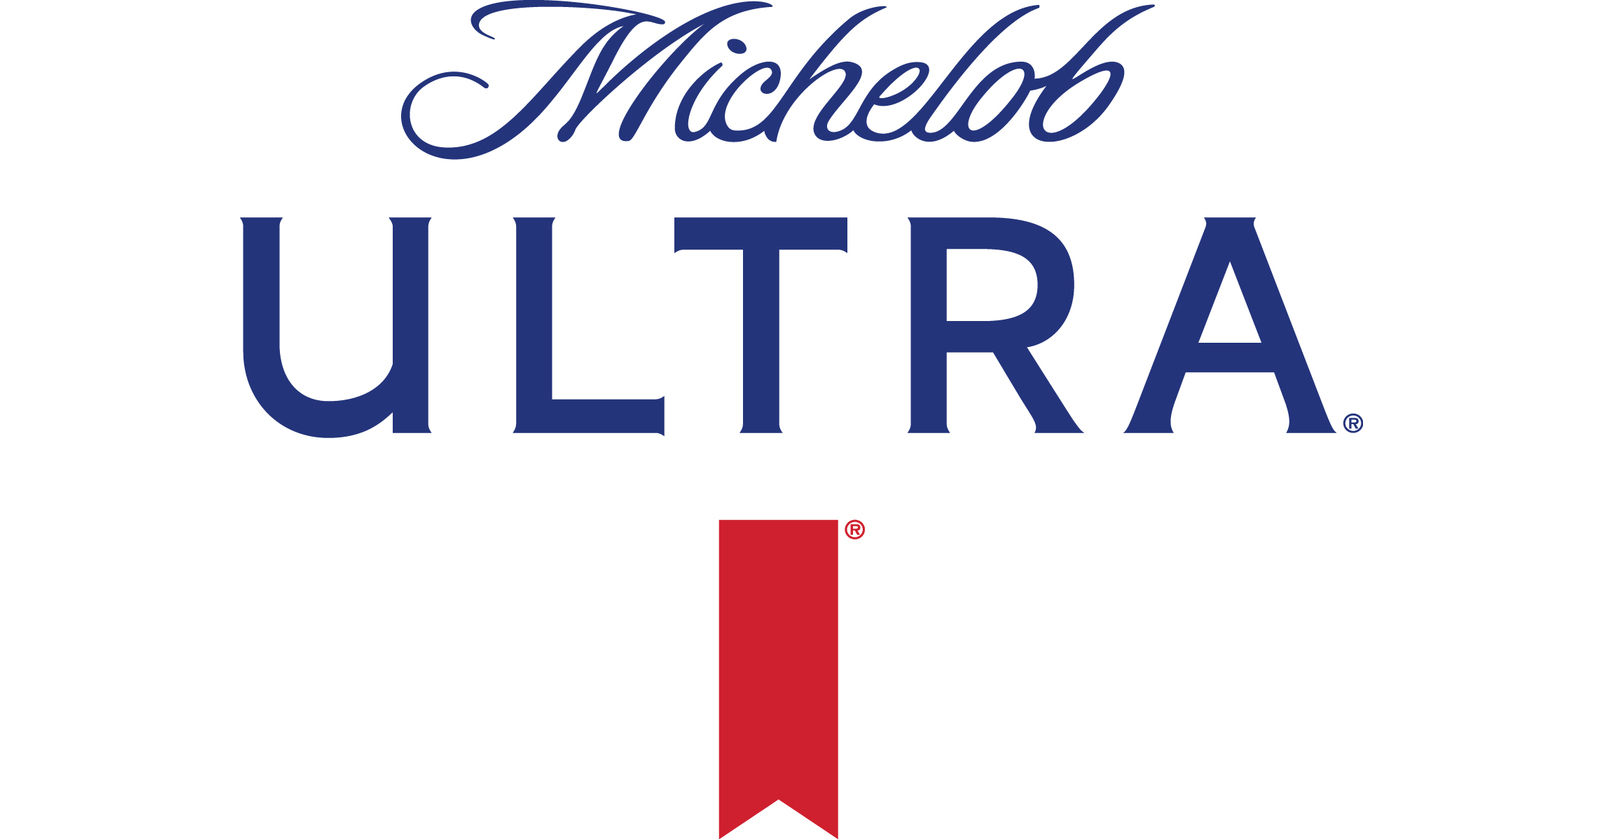 Michelob ULTRA To Provide 95 Bibs To BeerLoving Runners For The TCS